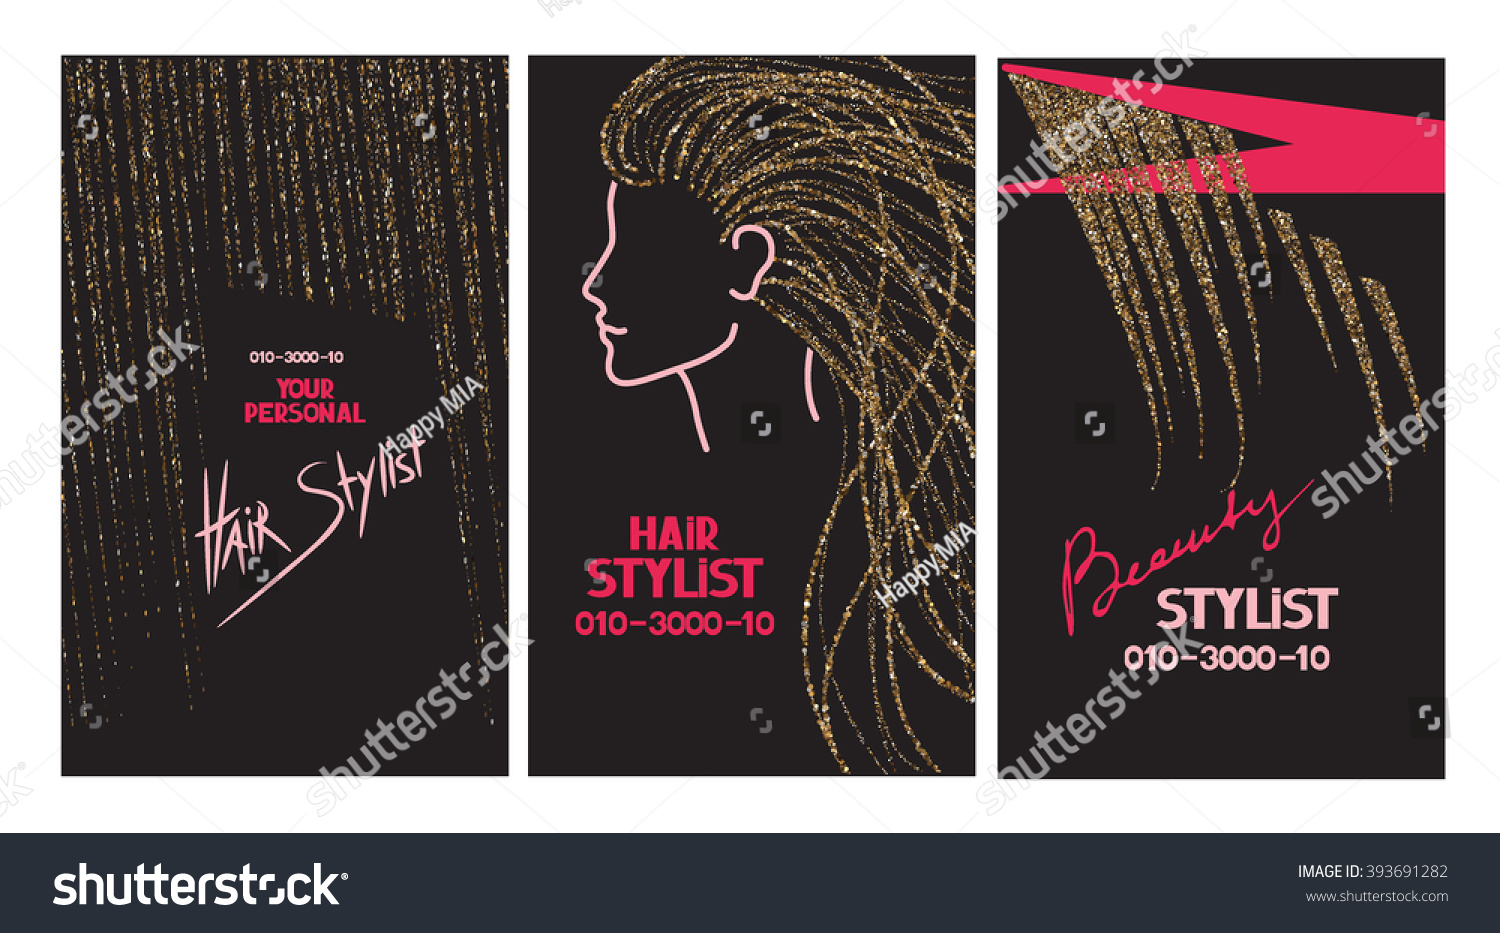 Hair Stylist Business Cards Abstract Gold Stock Vector 393691282